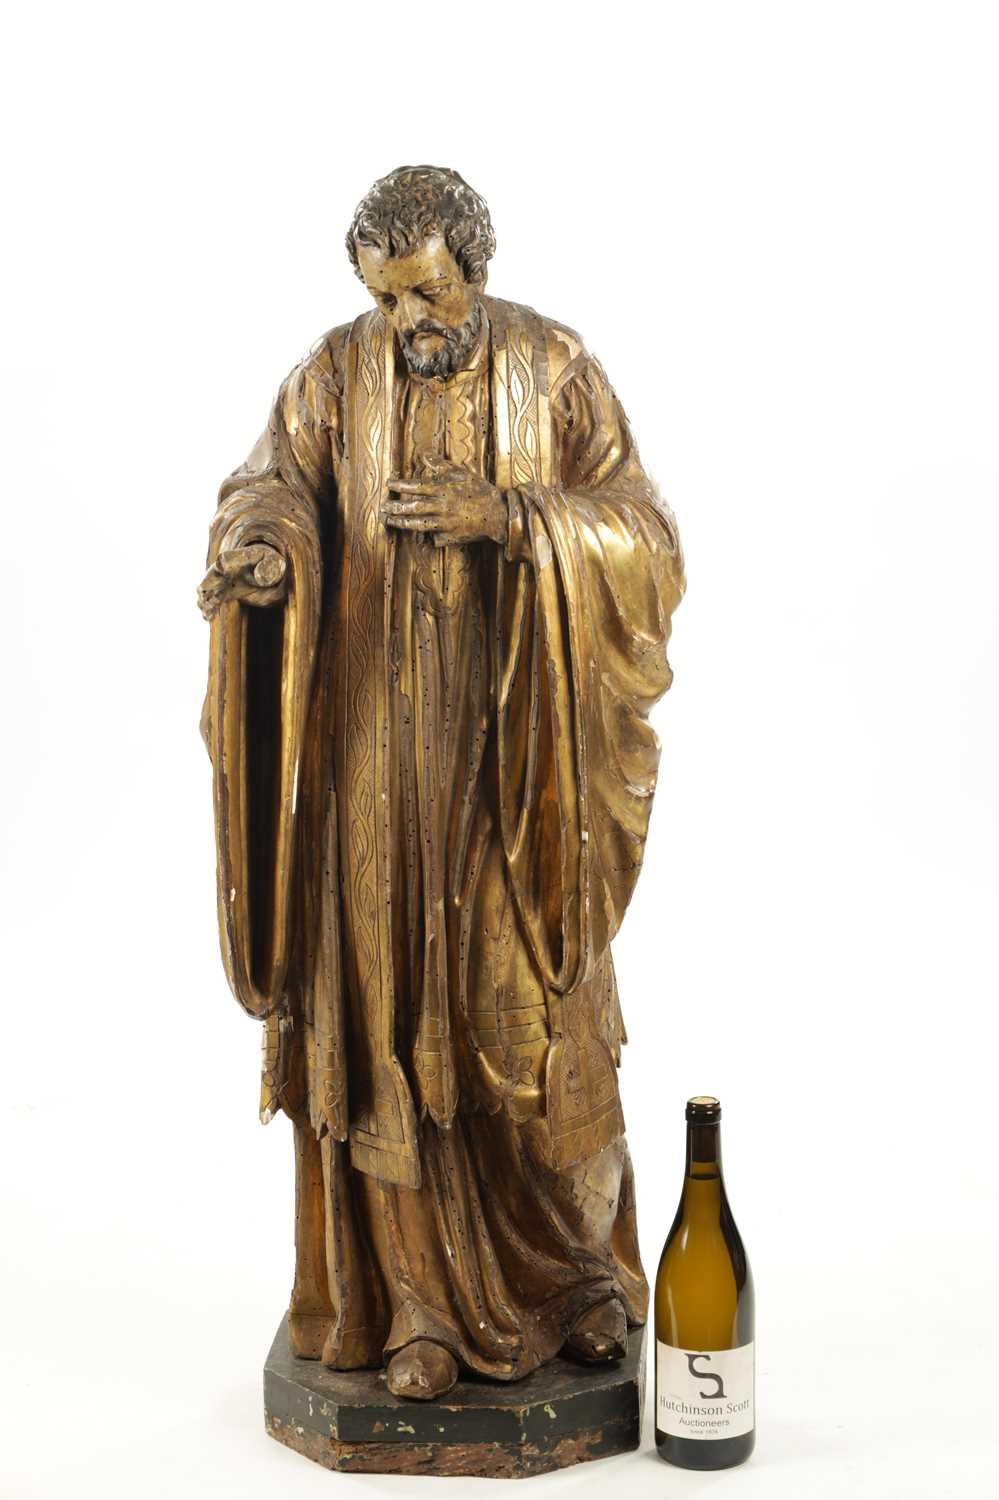 AN EARLY 17TH CENTURY CARVED WOOD GILT GESSO FIGURE OF CHRIST - Image 2 of 6